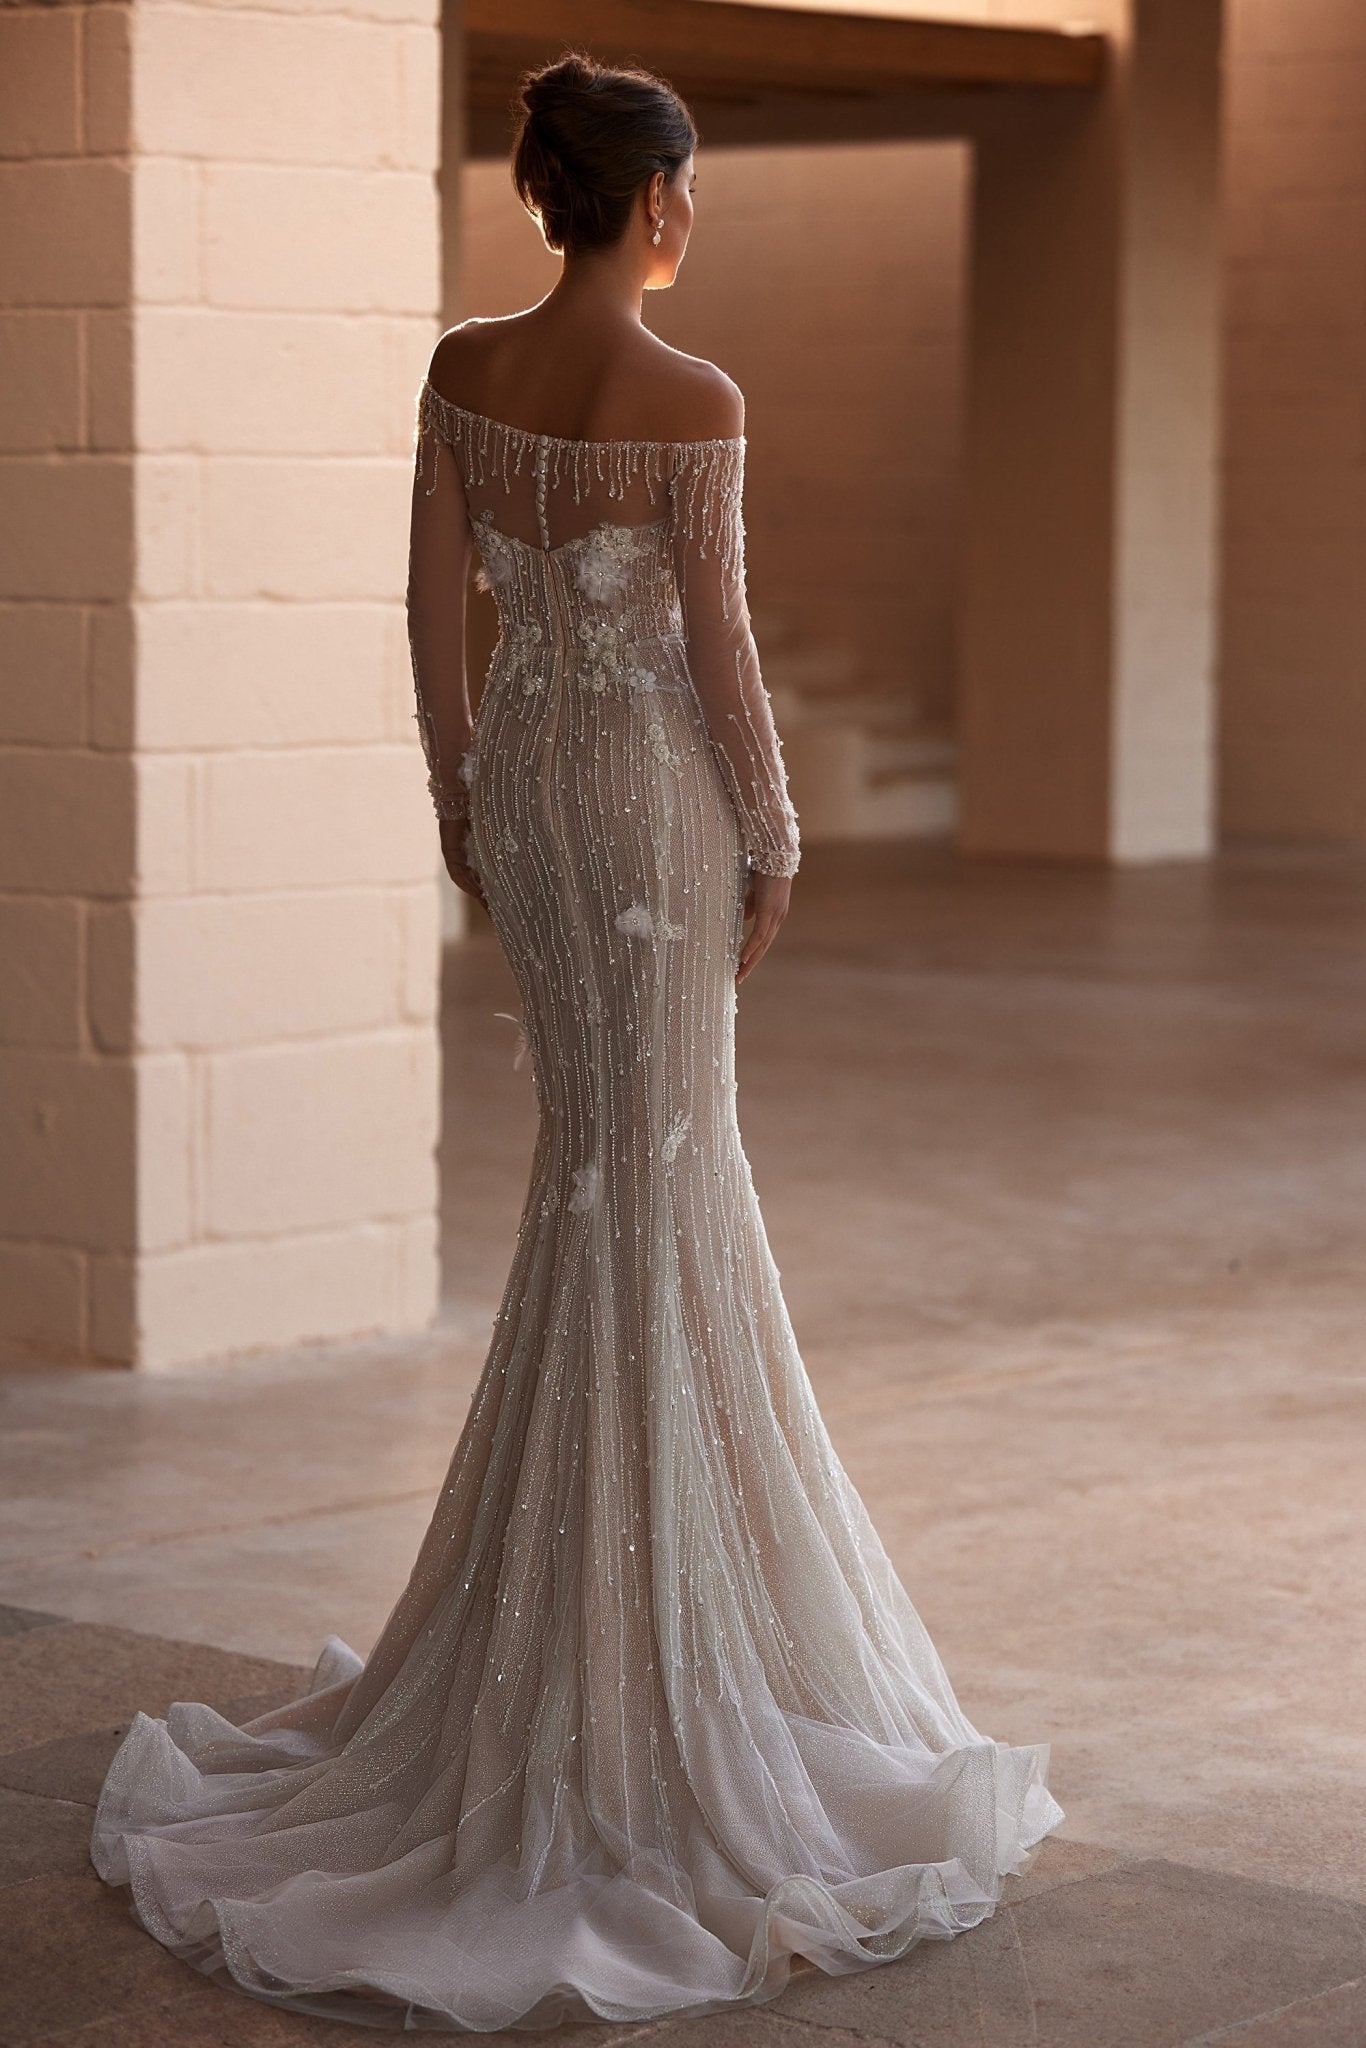 Elegant Off-the-Shoulder Beaded Bridal Gown with Over Skirt and Luxurious Train Plus Size - WonderlandByLilian